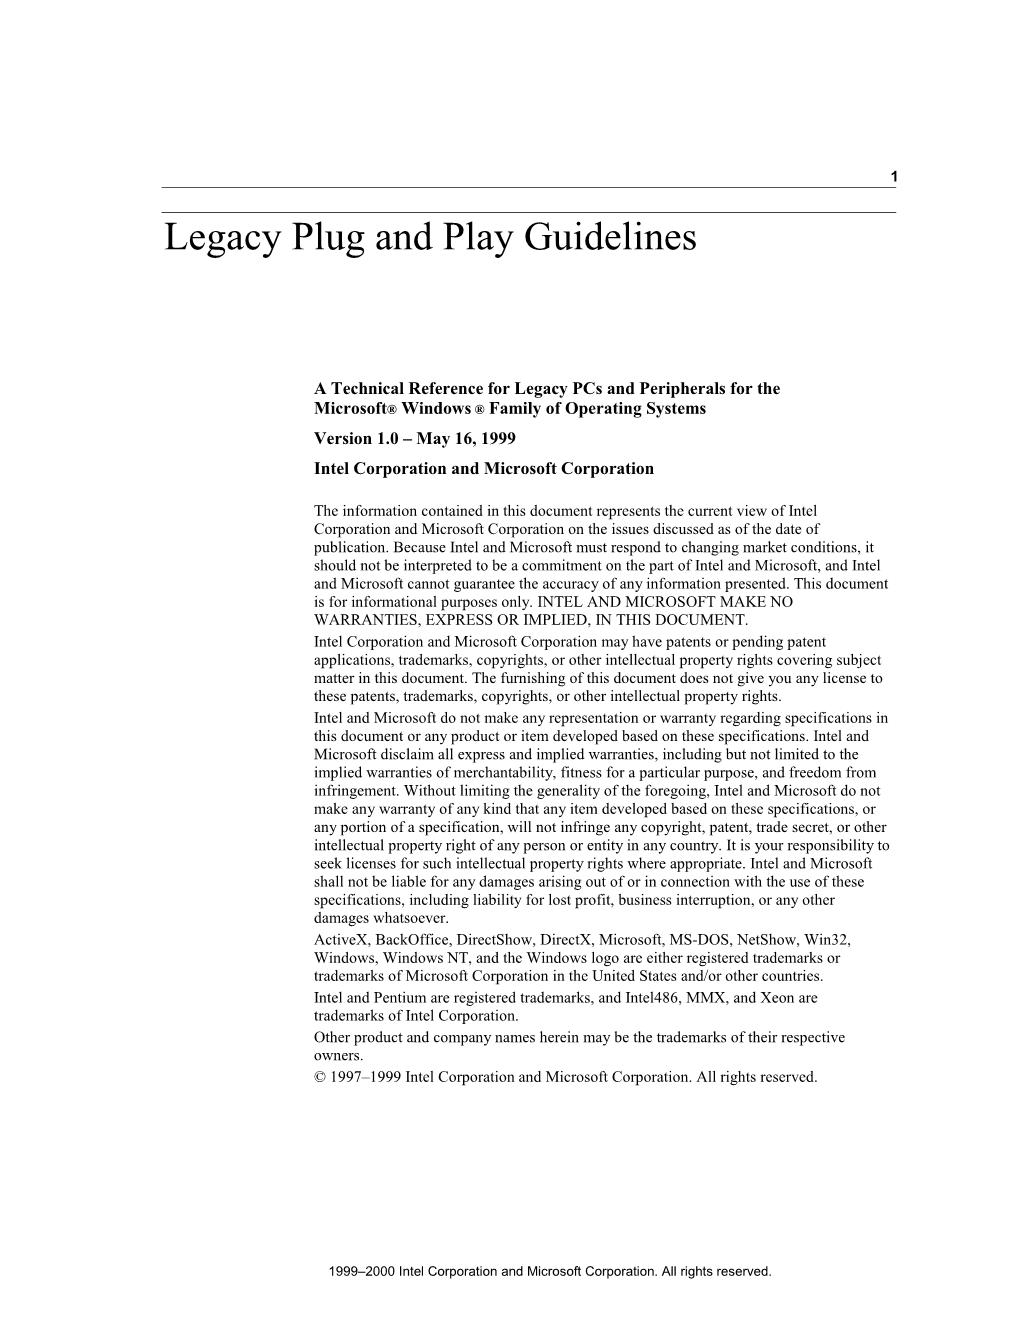 Legacy Plug and Play Guidelines